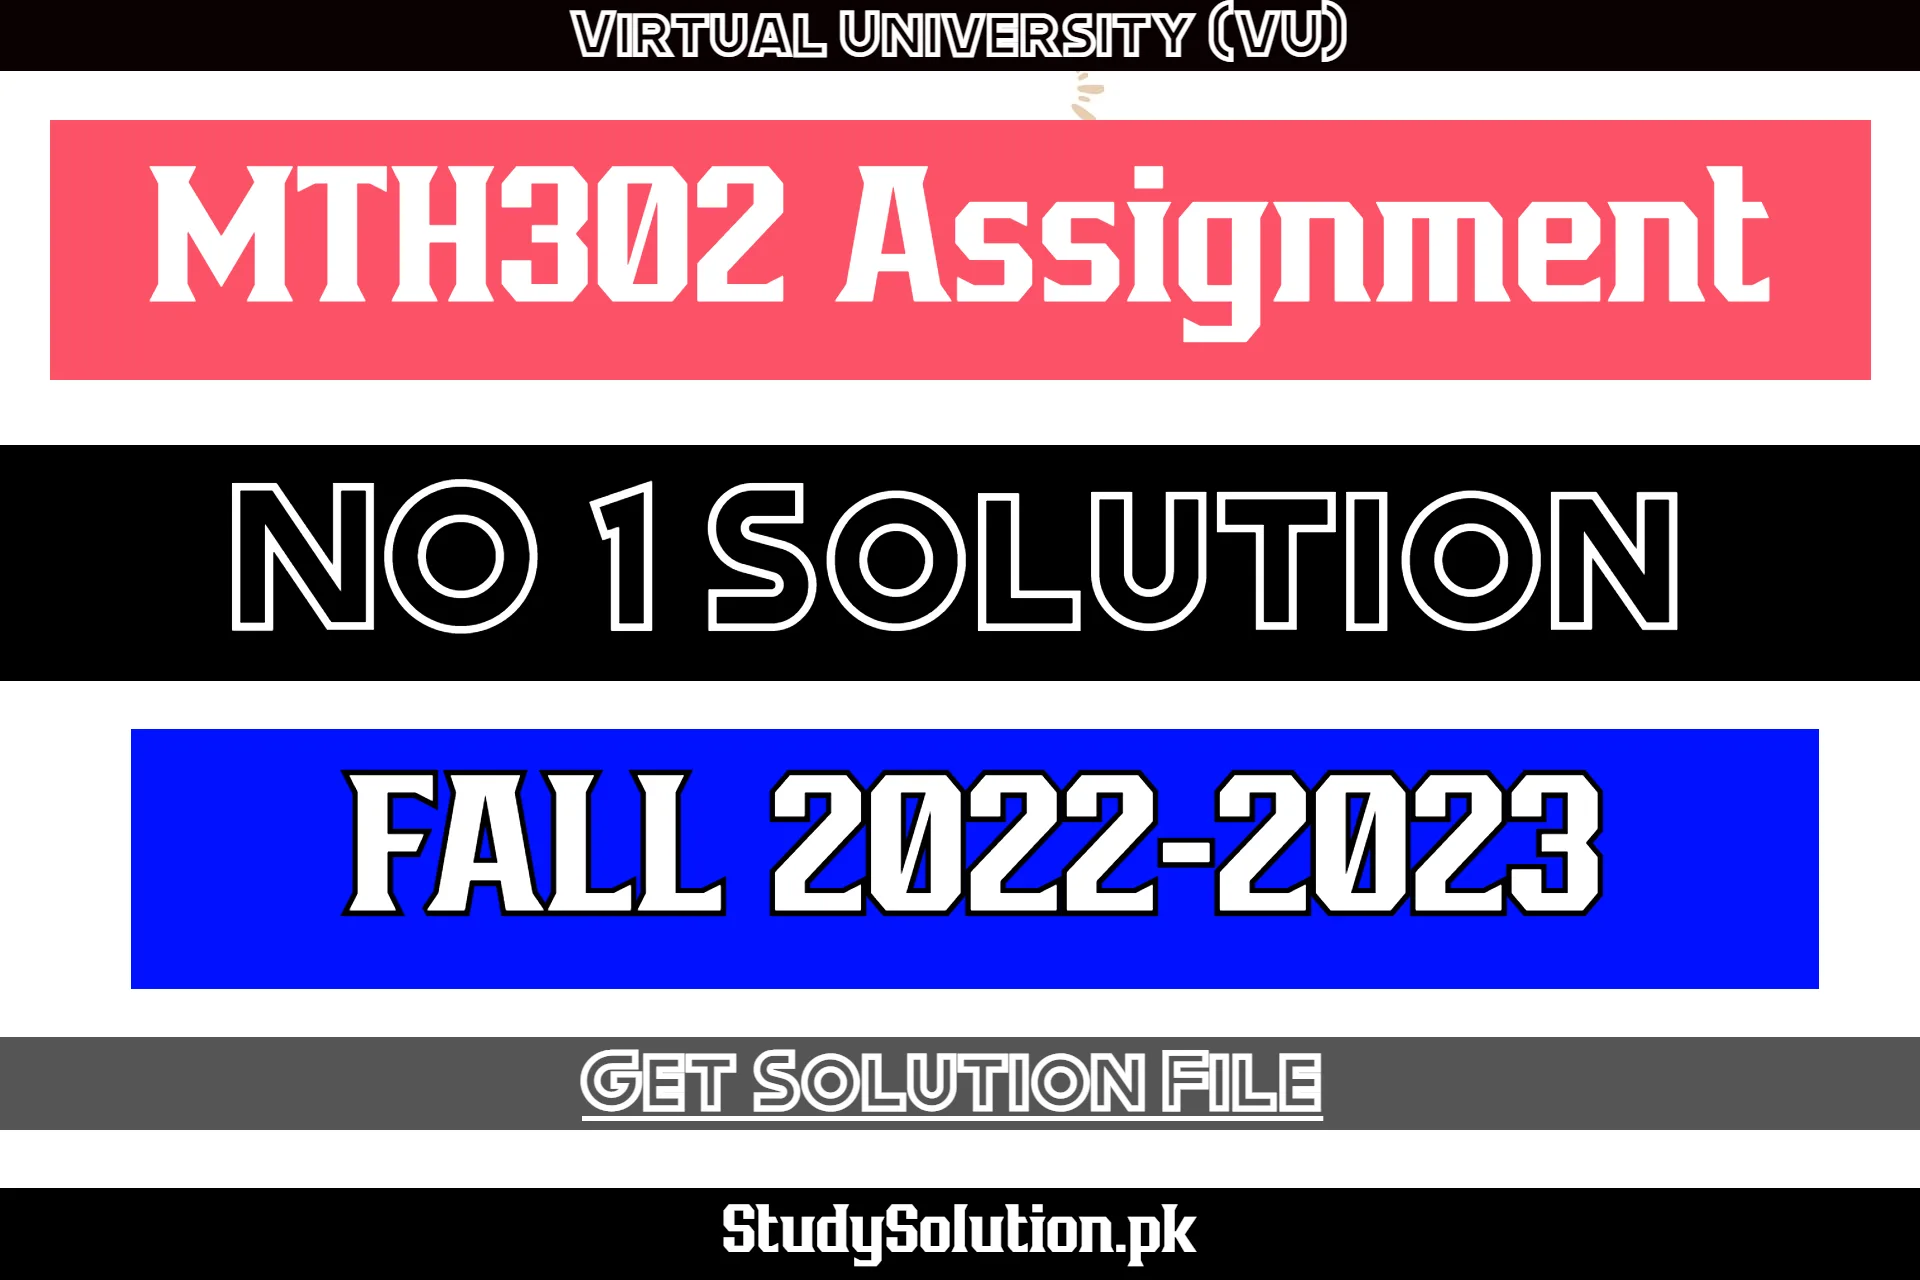 MTH302 Assignment No 1 Solution Fall 2022